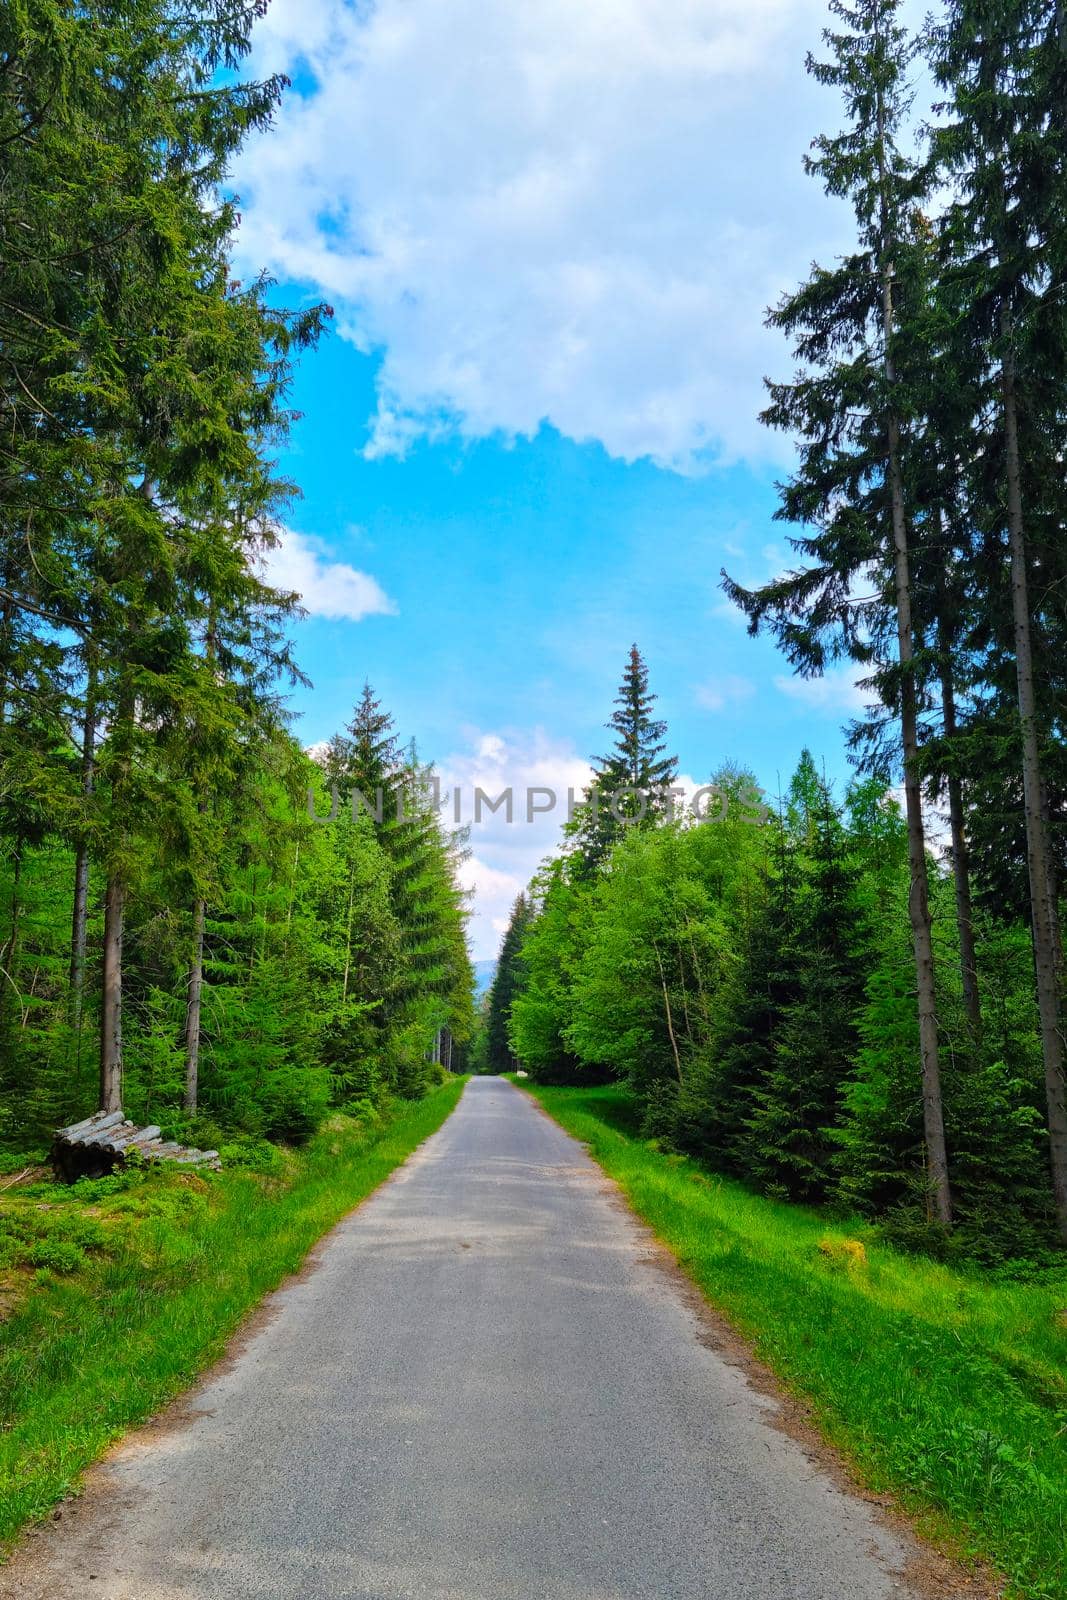 A picturesque road along the green forest. Clean air